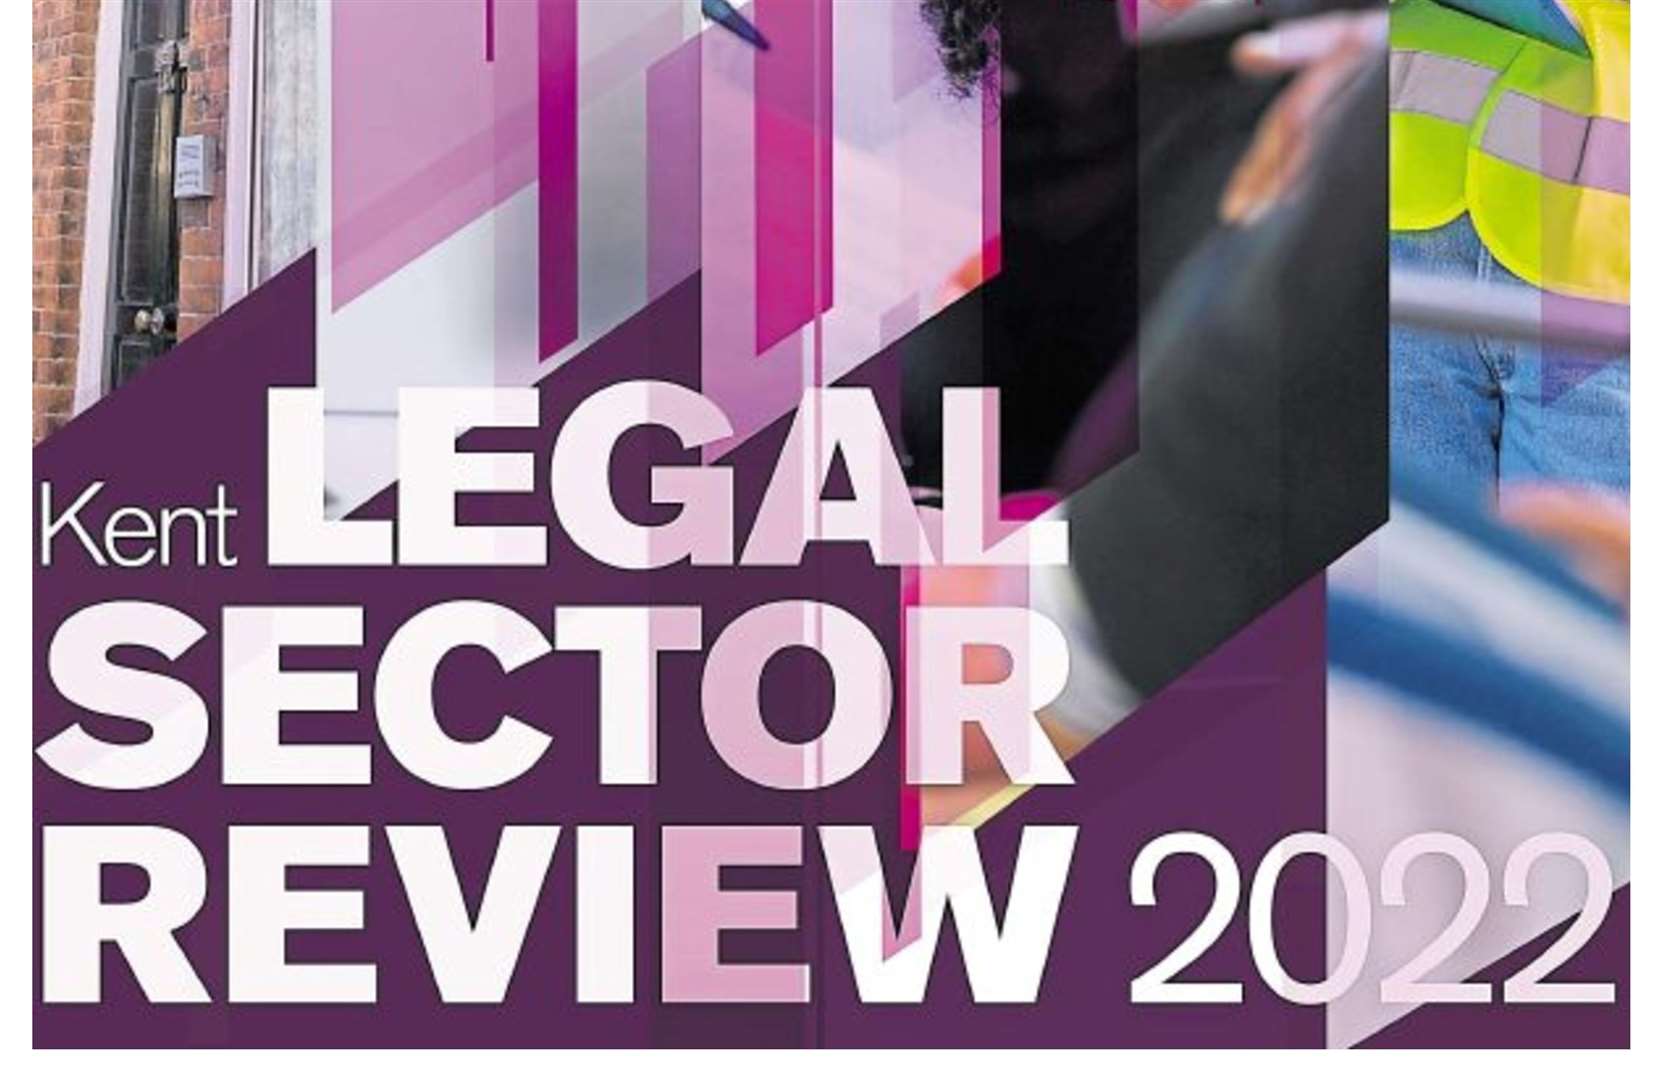 The Kent Legal Sector Review 2022 is out now